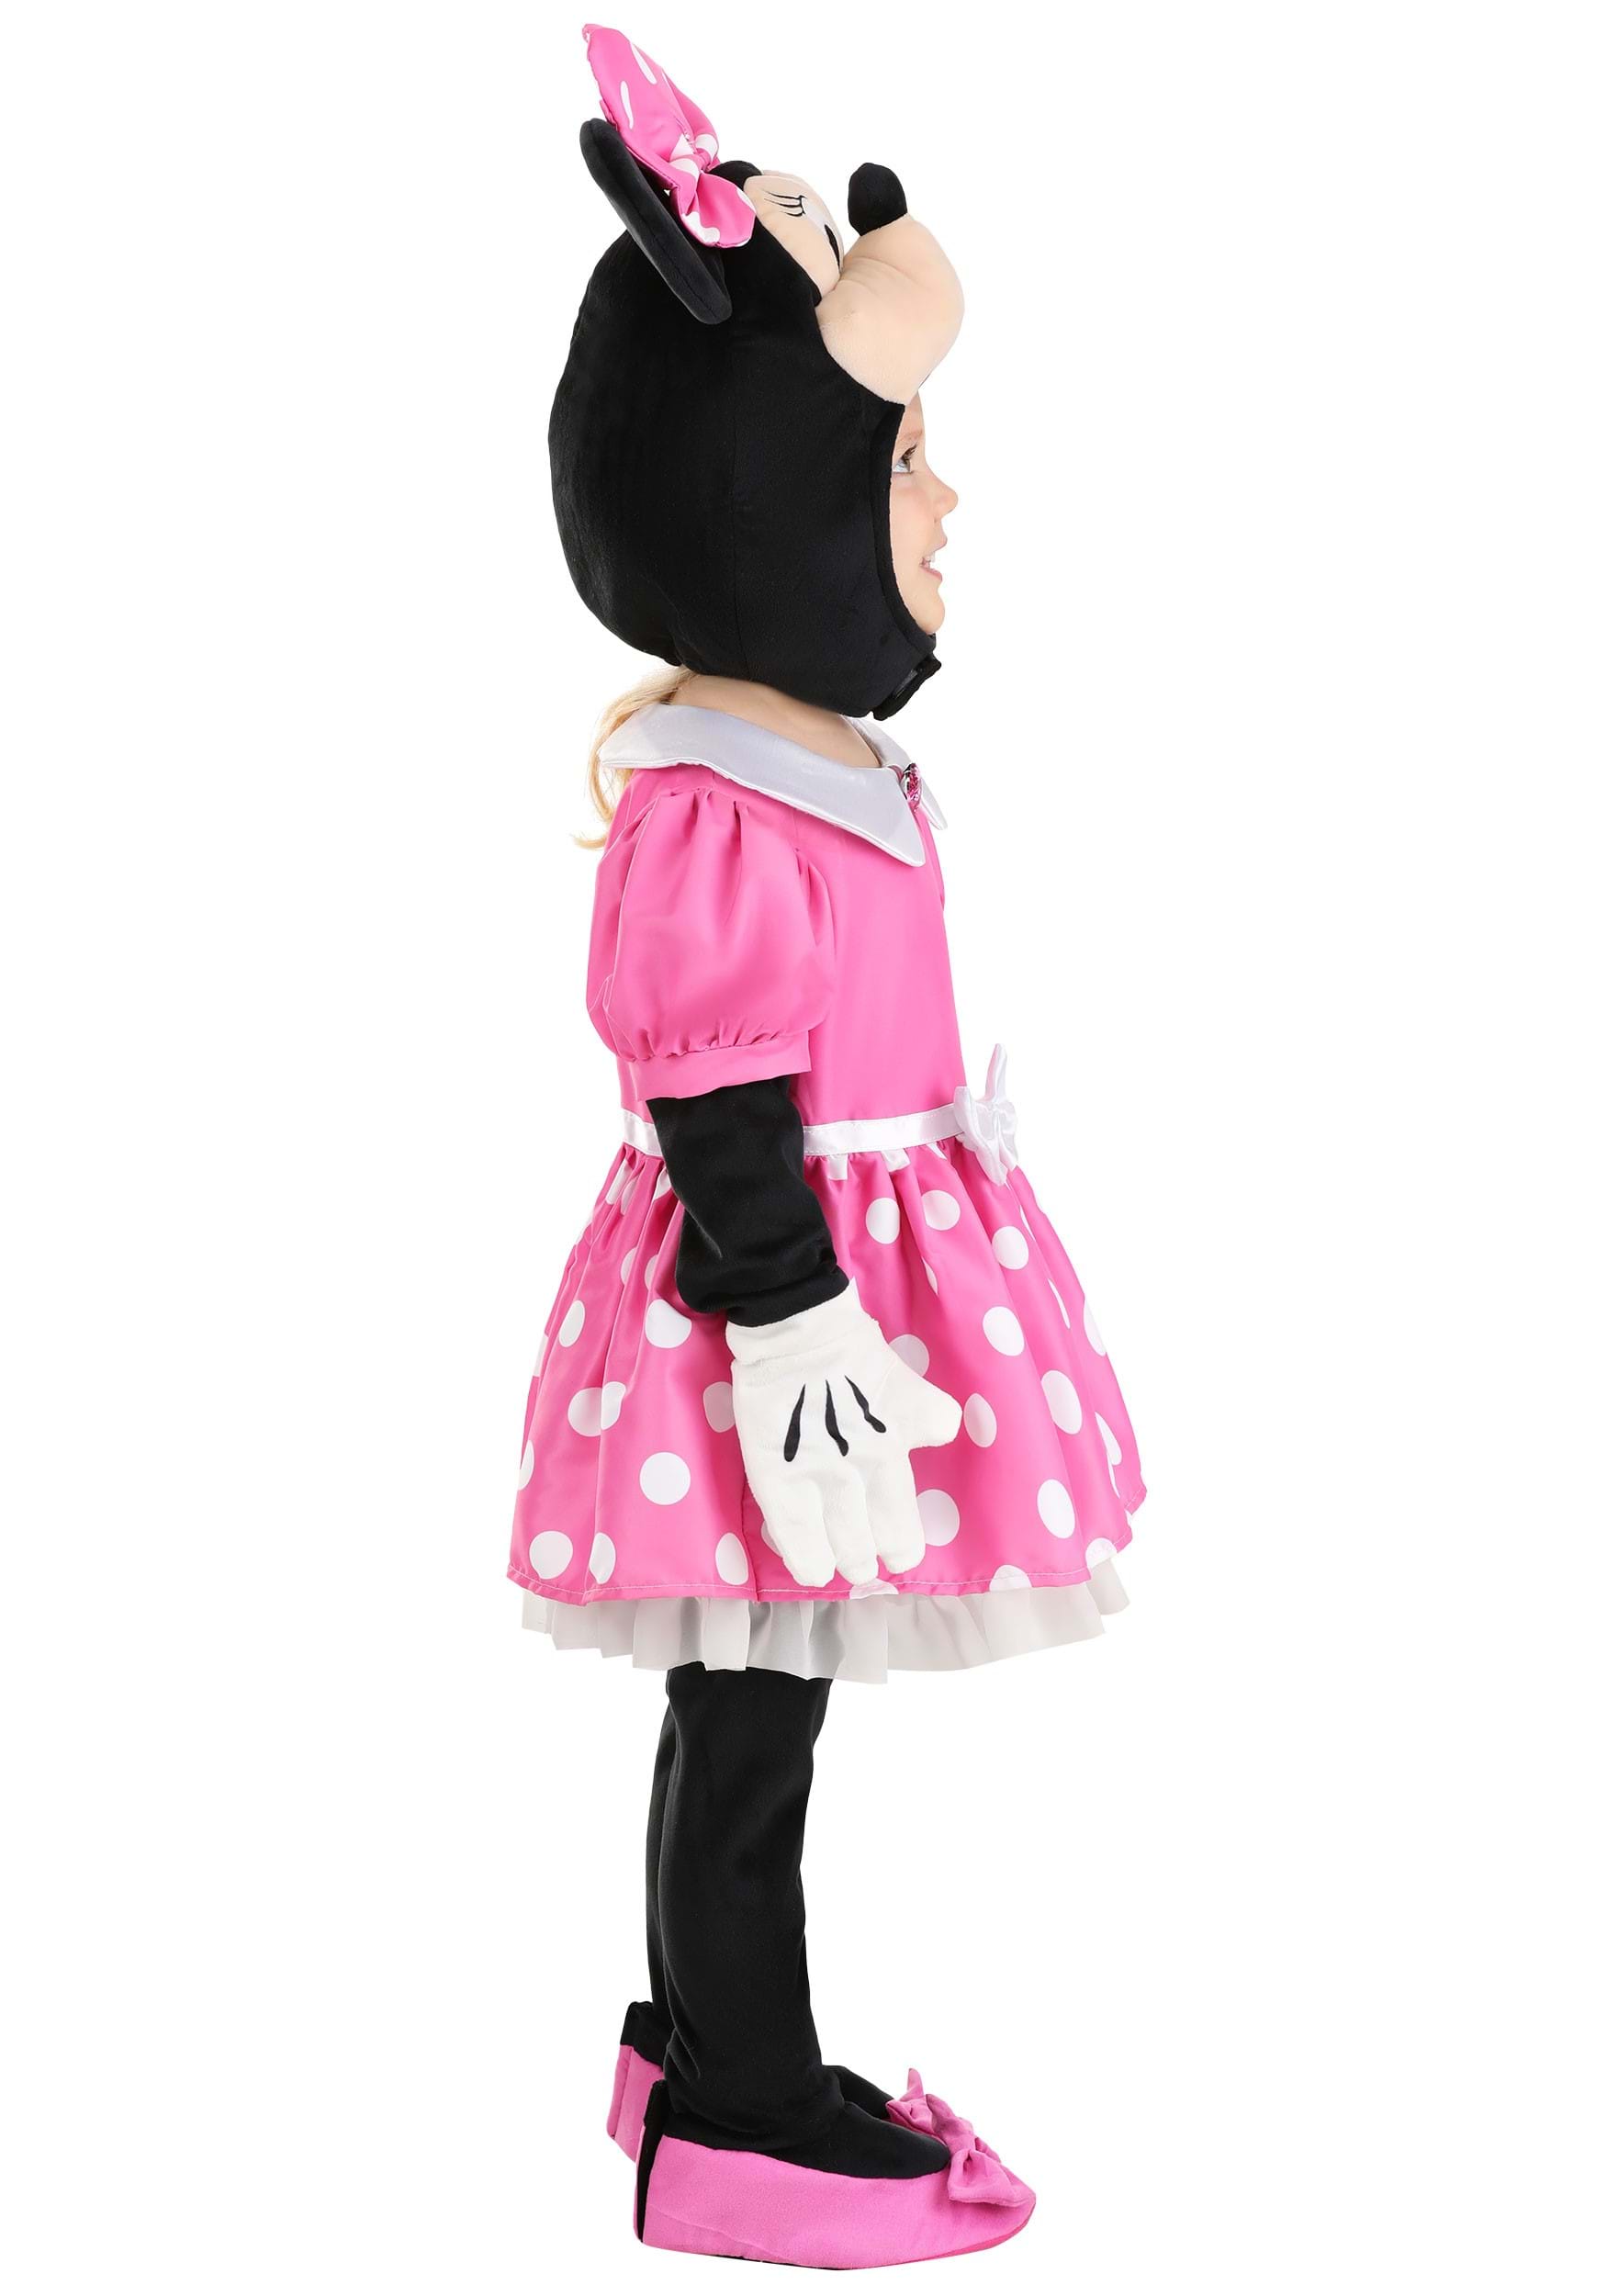 Sweet Minnie Mouse Toddler Costume